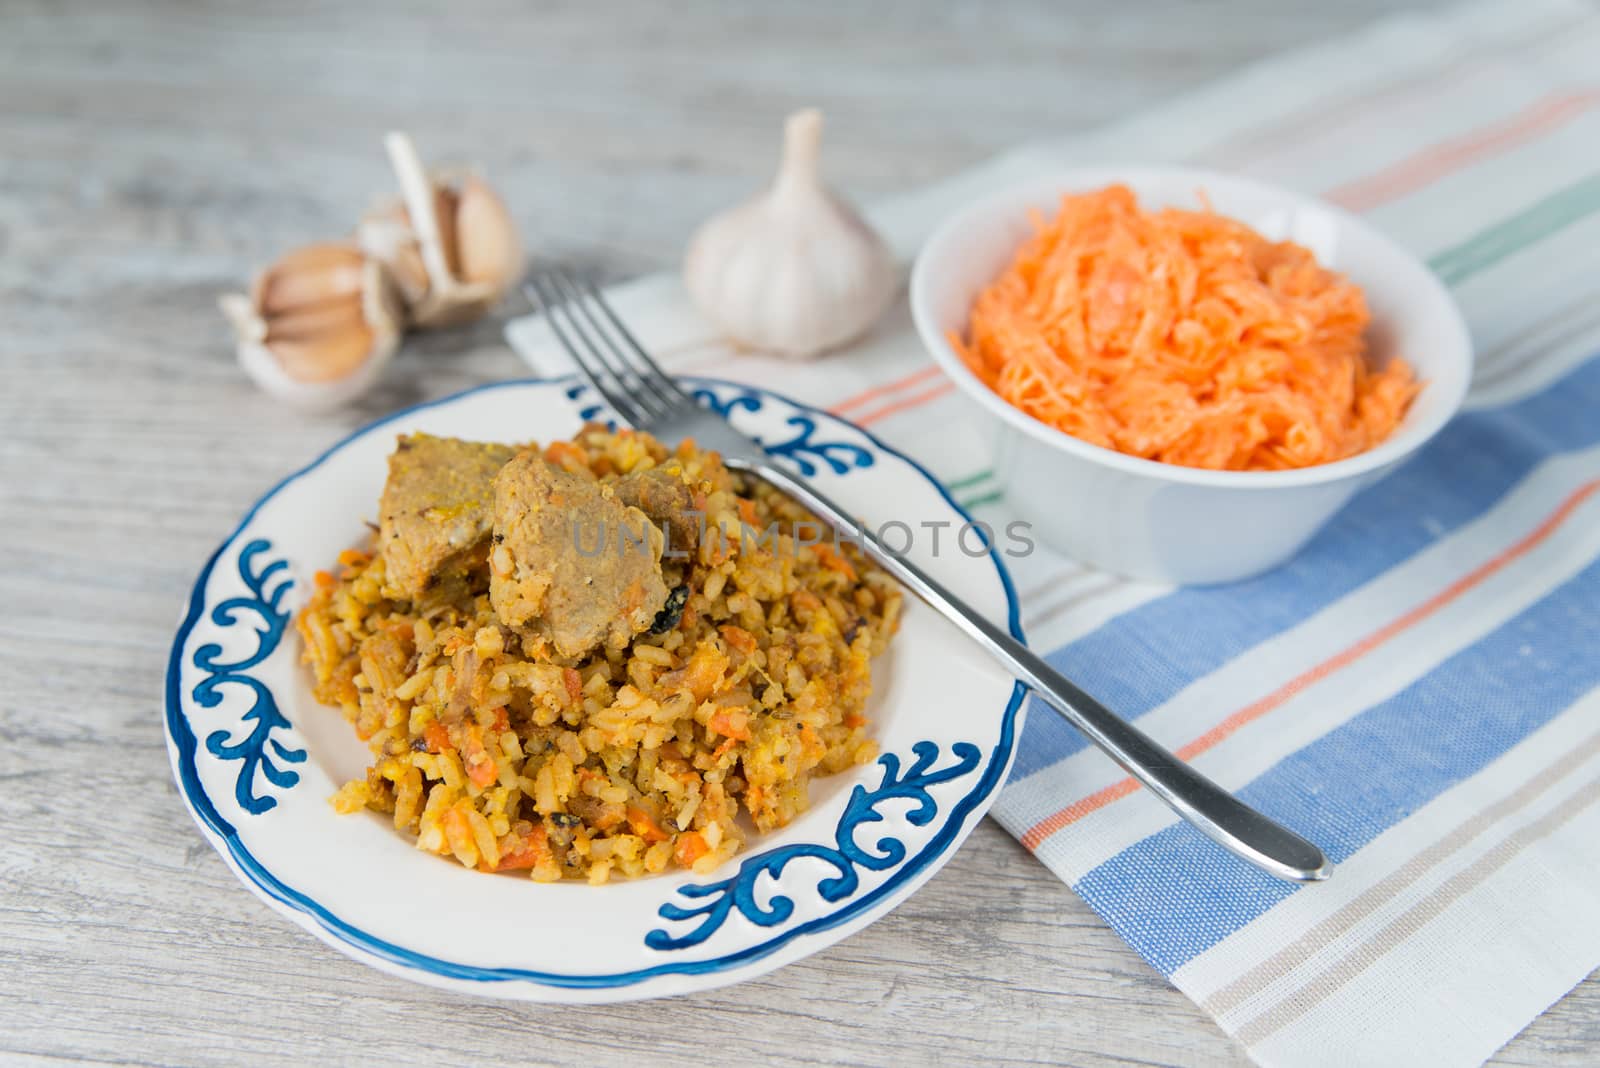 Plate of rice and meat dish pilau and carrot salad by Linaga